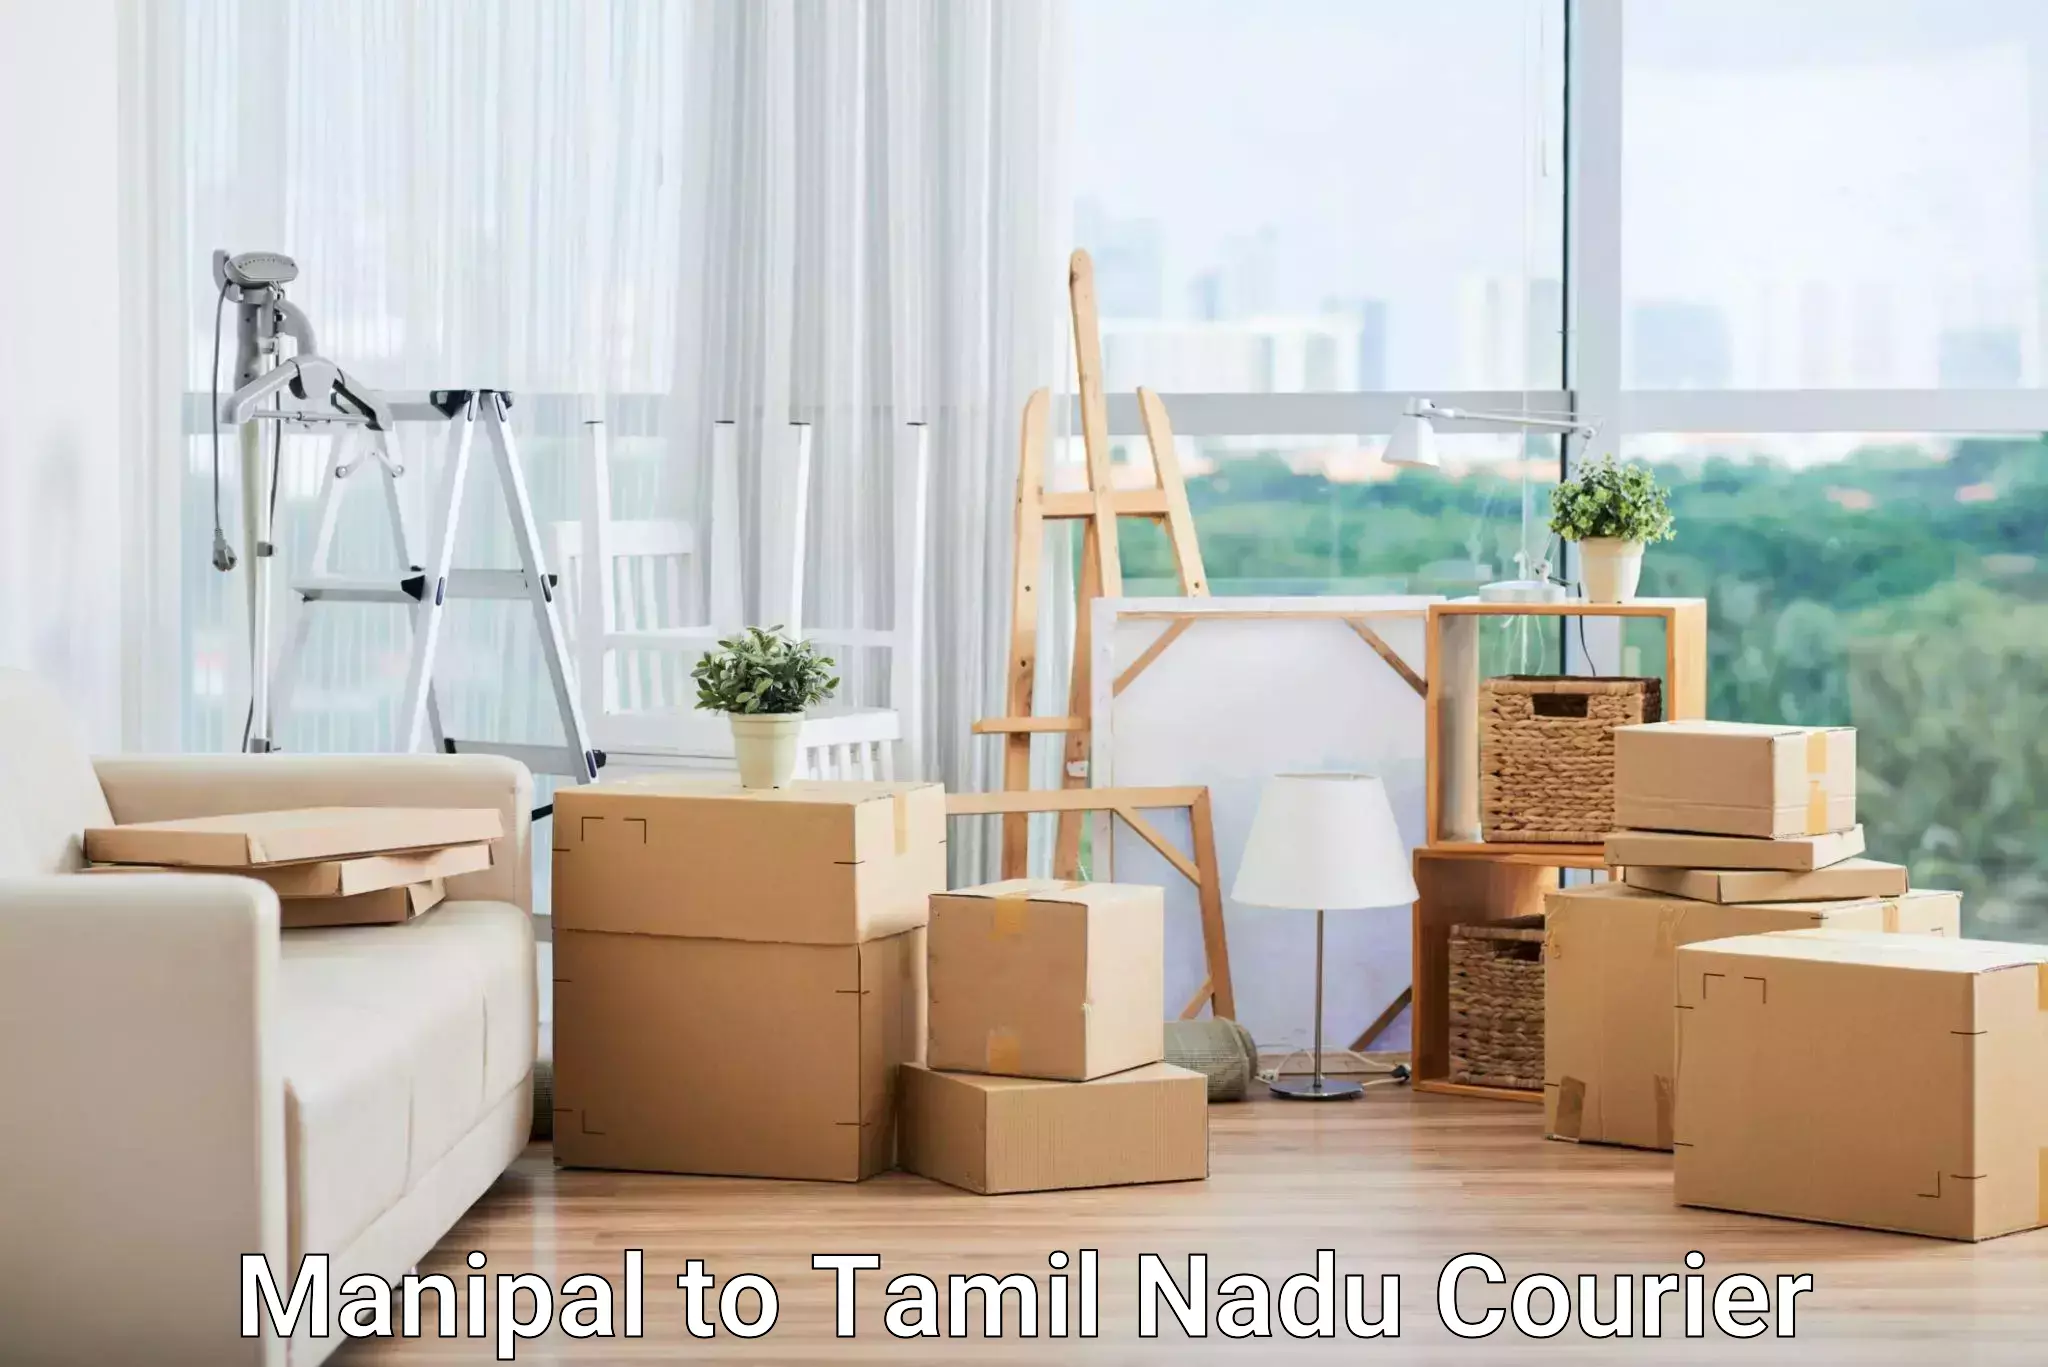 Courier service comparison Manipal to Nagercoil